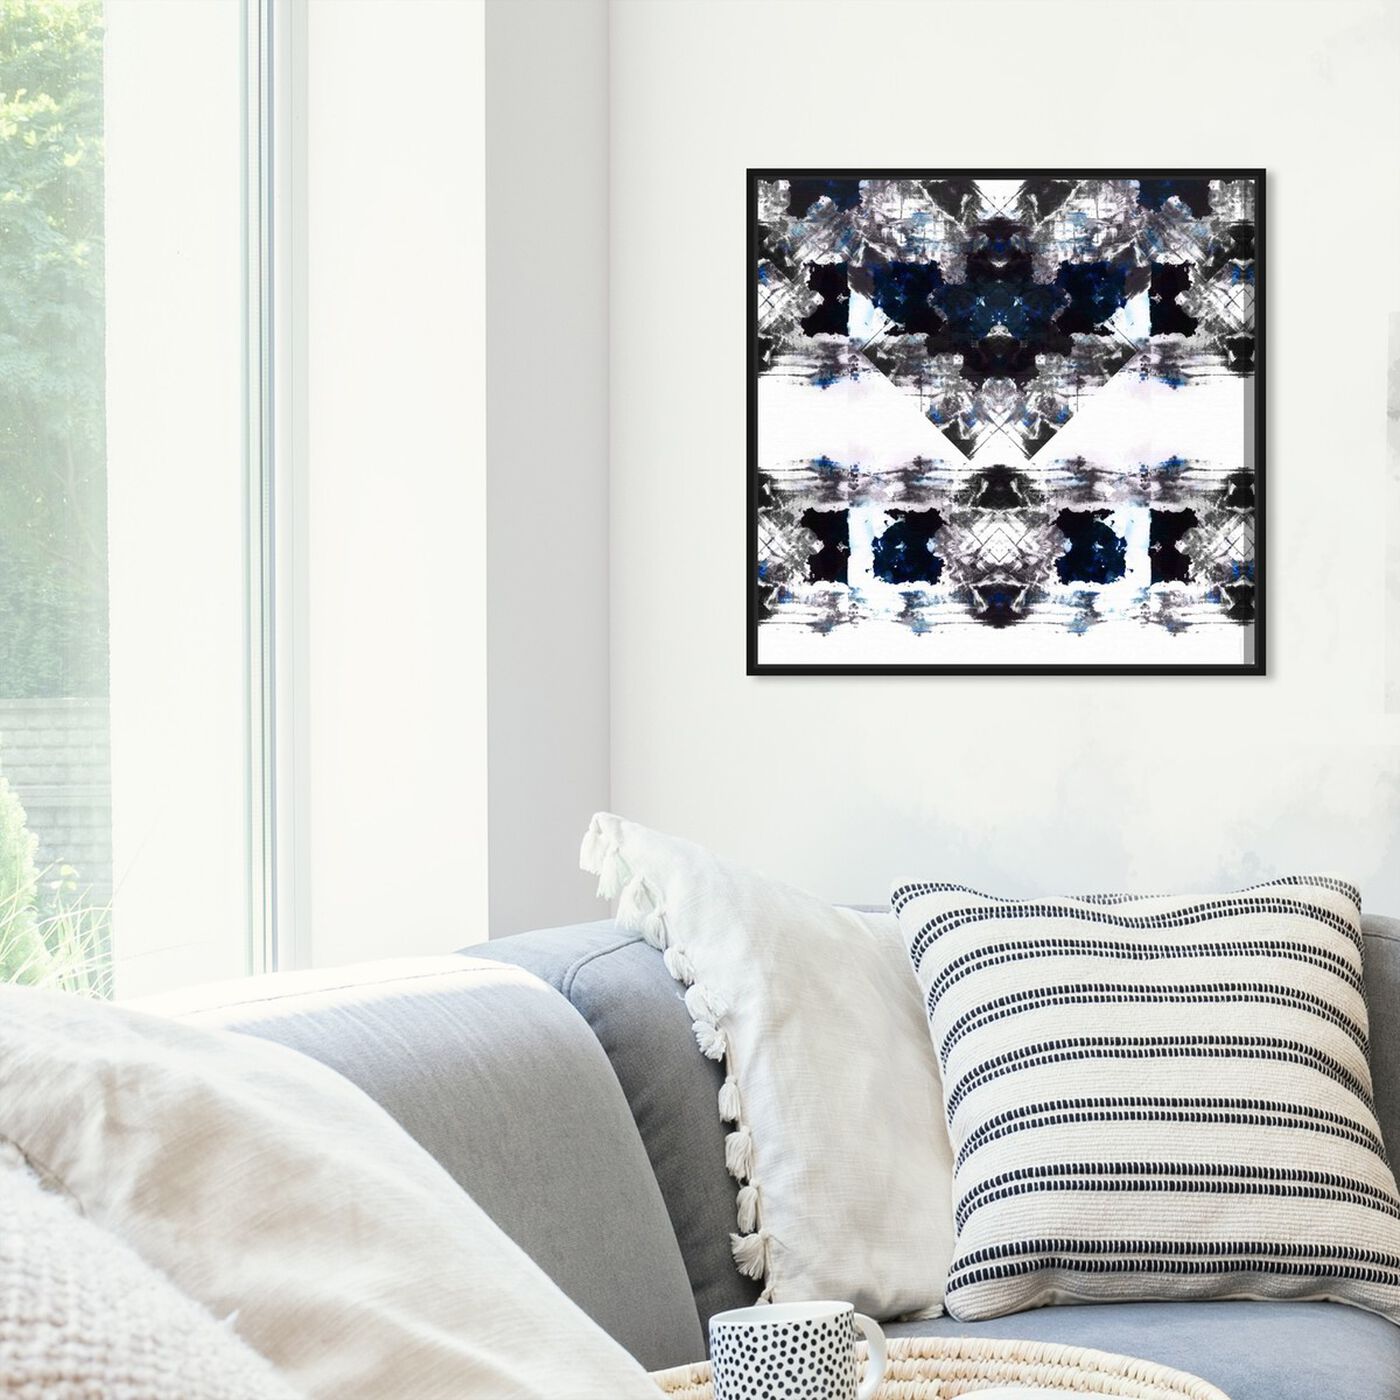 Hanging view of Oeuvre featuring abstract and patterns art.